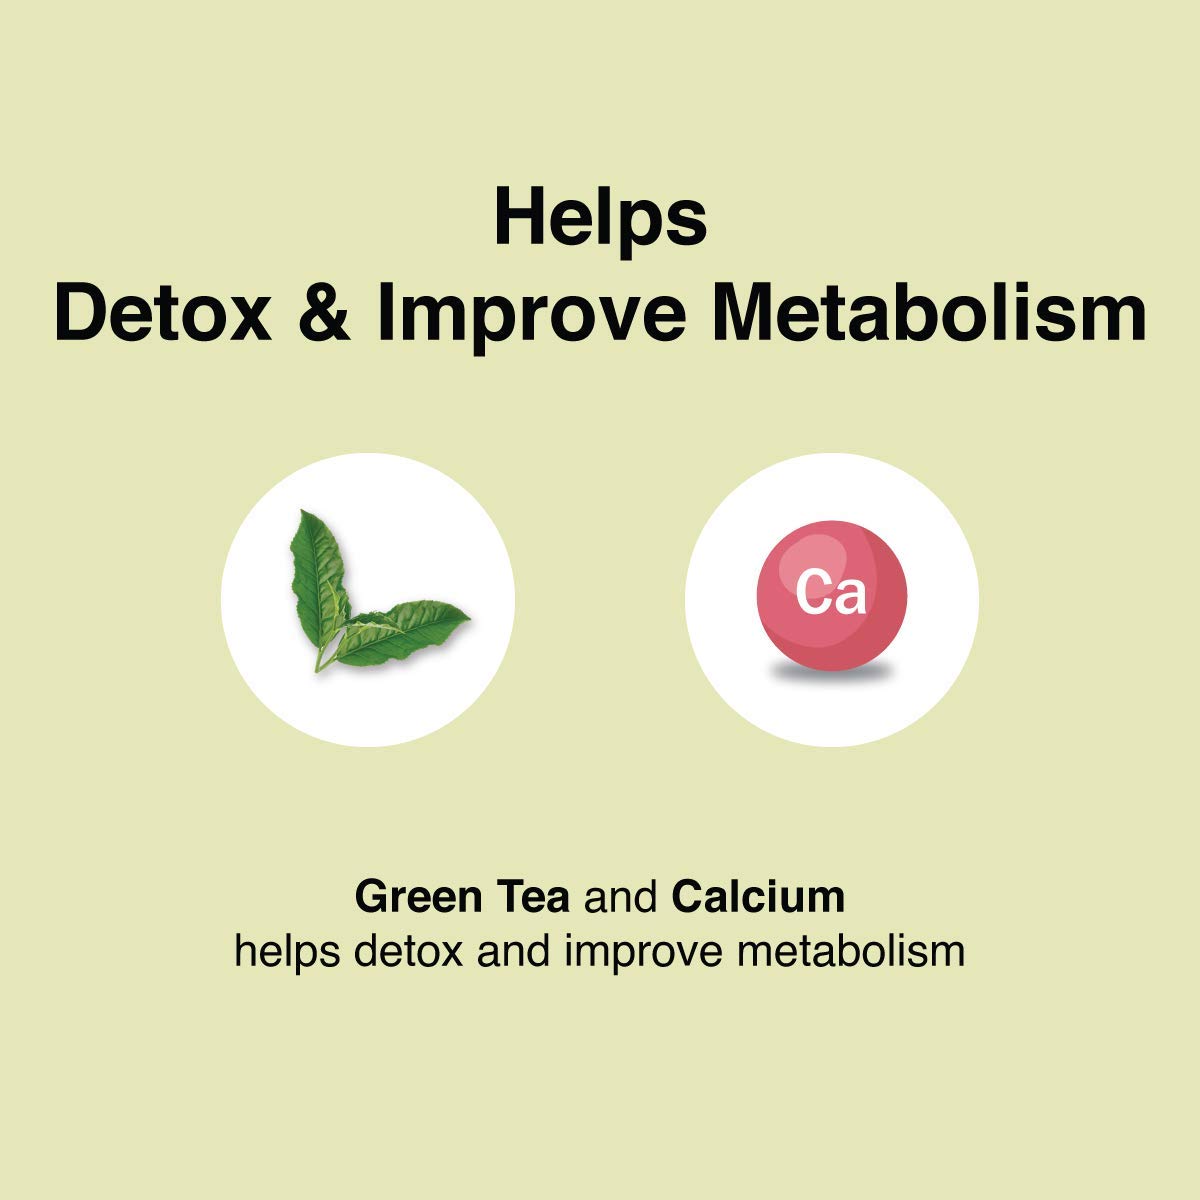 & ME Green Tea for for weight management, detox (50 gm Pack, 25 Cups).